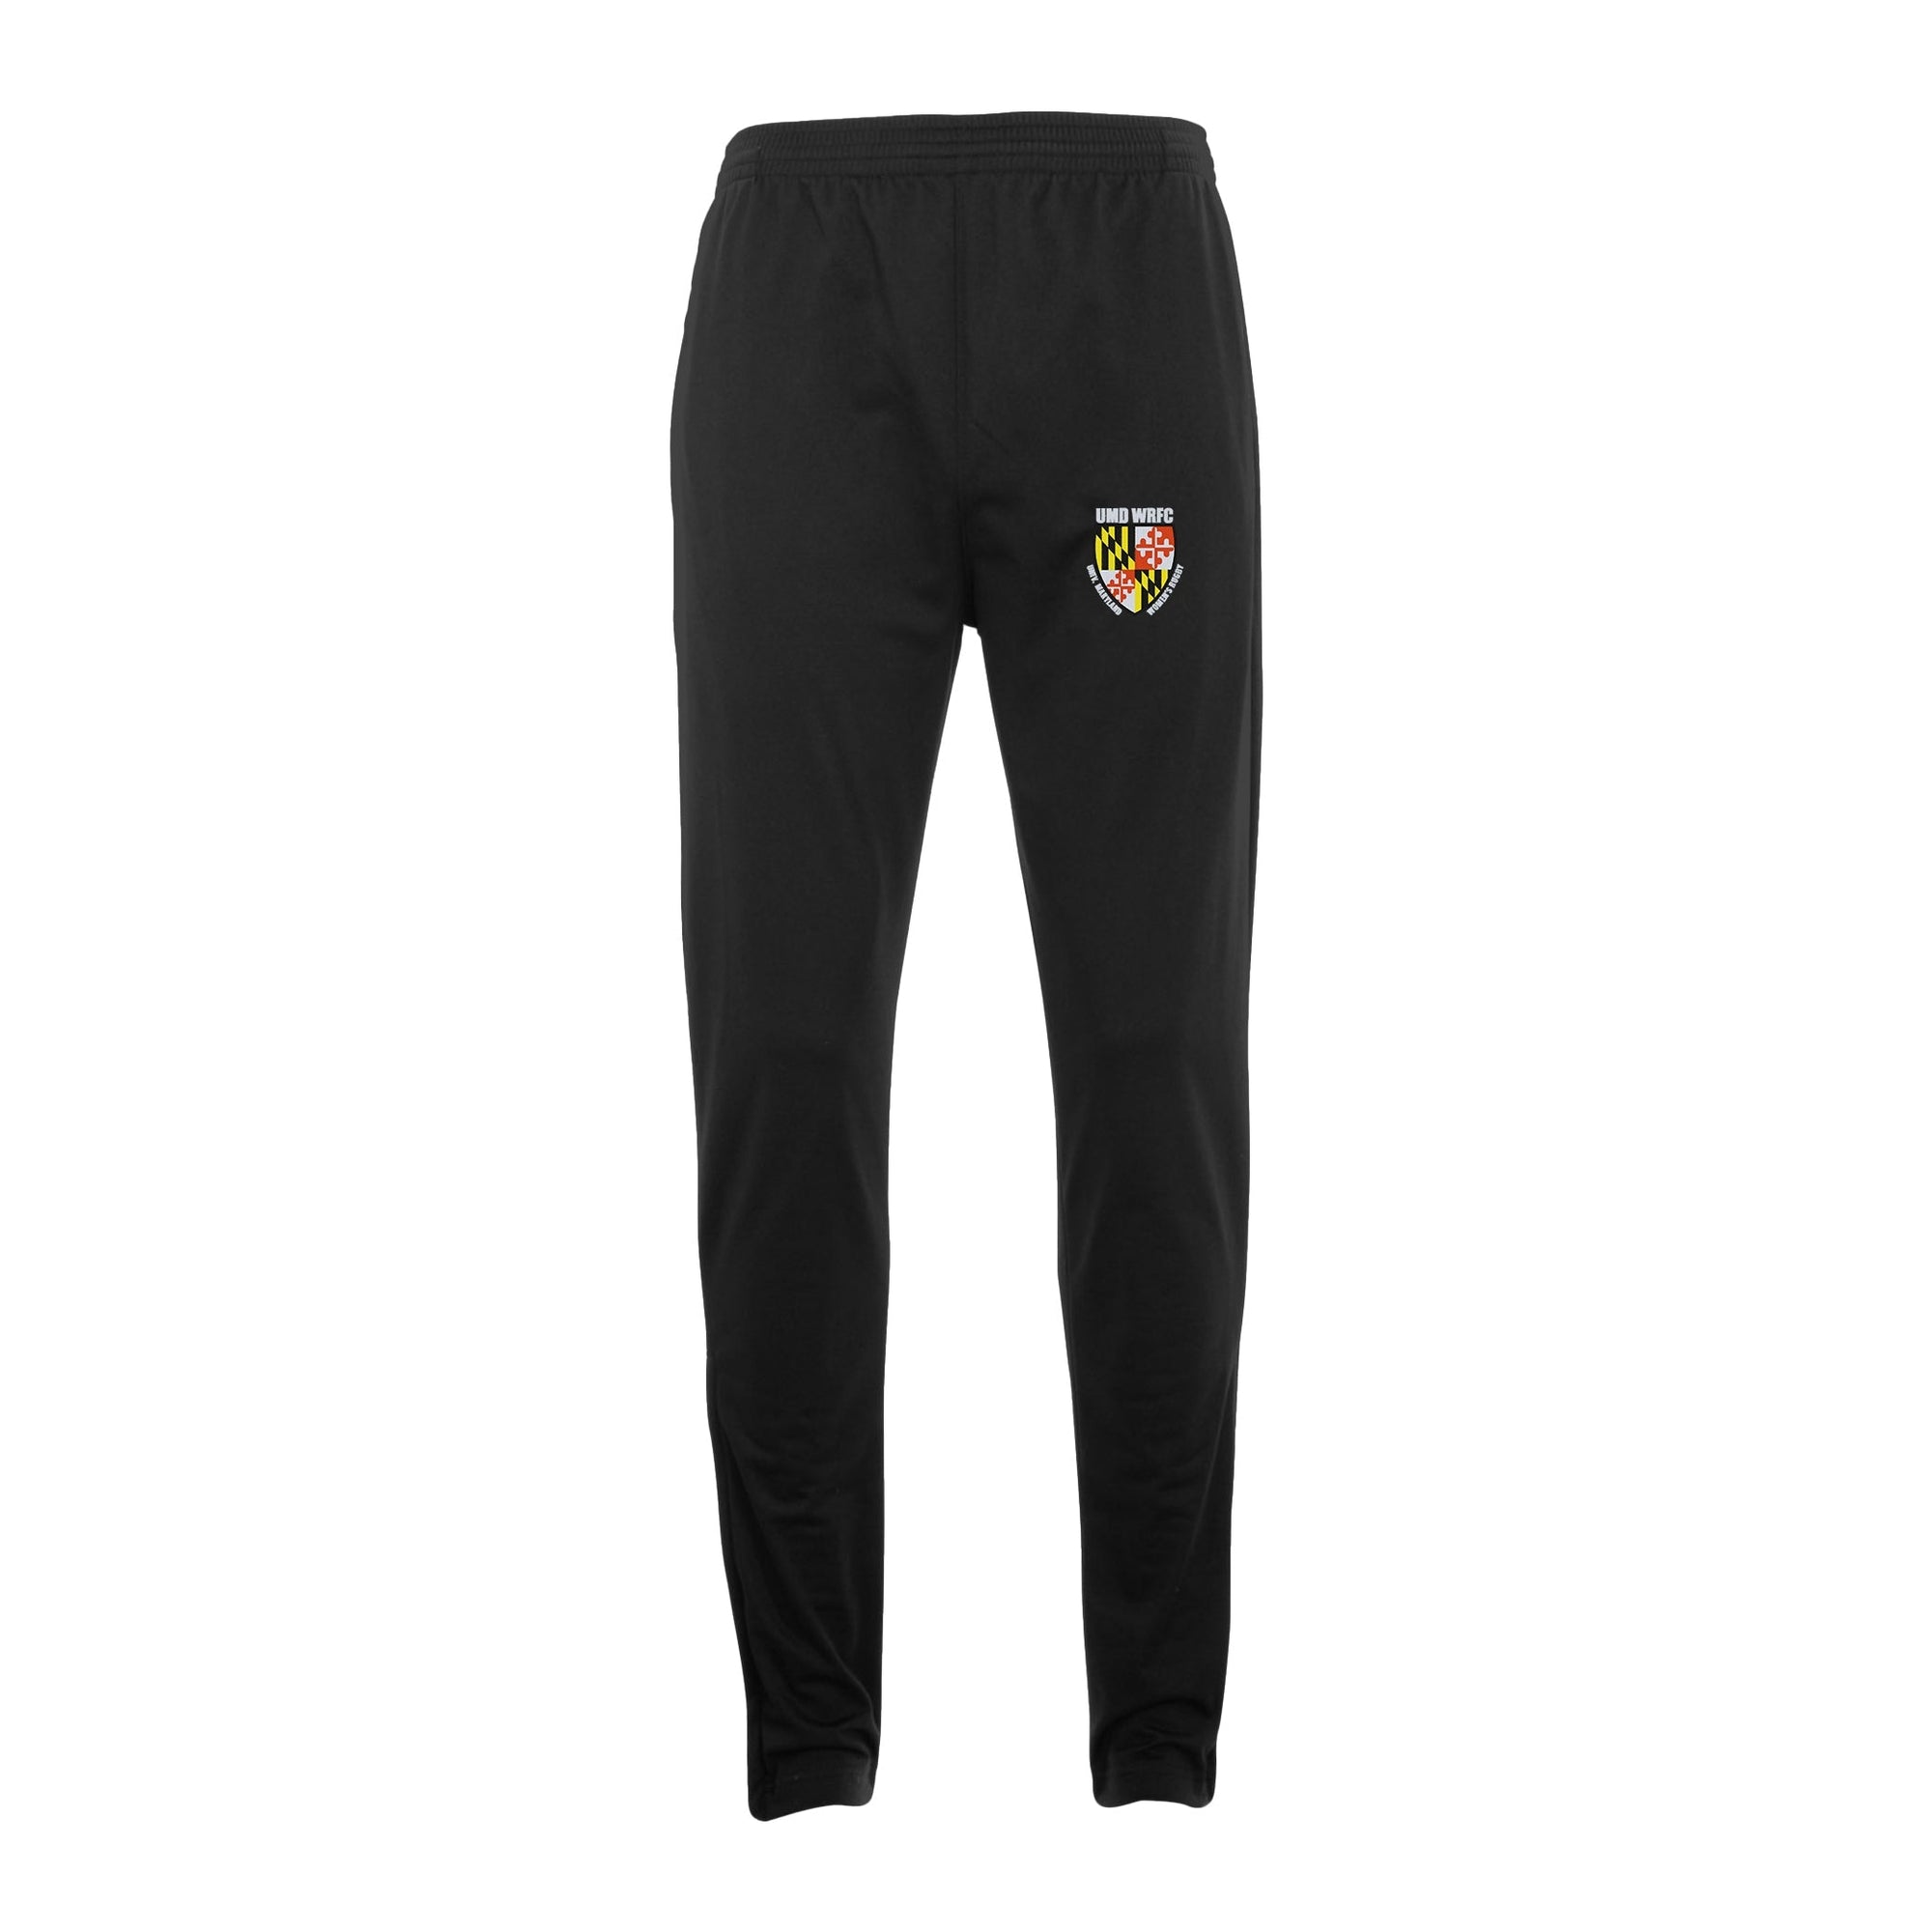 Rugby Imports UMD WRFC Unisex Tapered Leg Pant